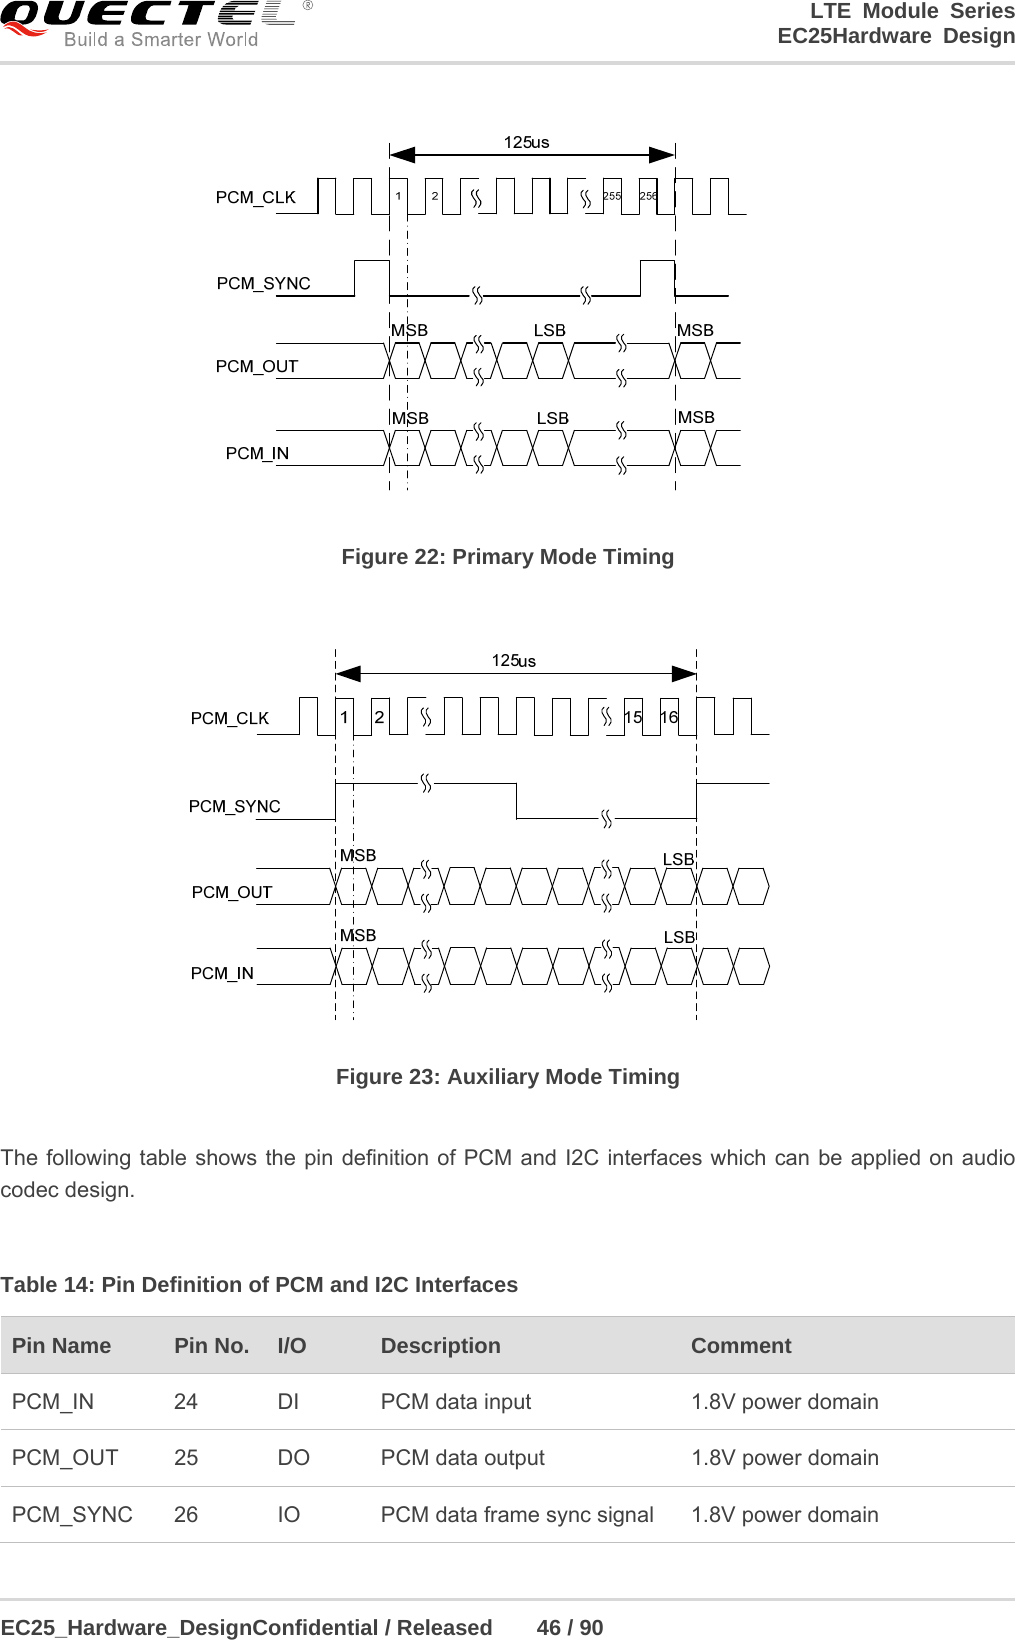 LTE Module Series                                                  EC25Hardware Design  EC25_Hardware_DesignConfidential / Released    46 / 90     Figure 22: Primary Mode Timing  Figure 23: Auxiliary Mode Timing  The following table shows the pin definition of PCM and I2C interfaces which can be applied on audio codec design.  Table 14: Pin Definition of PCM and I2C Interfaces Pin Name    Pin No.  I/O  Description   Comment PCM_IN  24  DI  PCM data input  1.8V power domain PCM_OUT  25  DO  PCM data output  1.8V power domain PCM_SYNC  26  IO  PCM data frame sync signal  1.8V power domain 